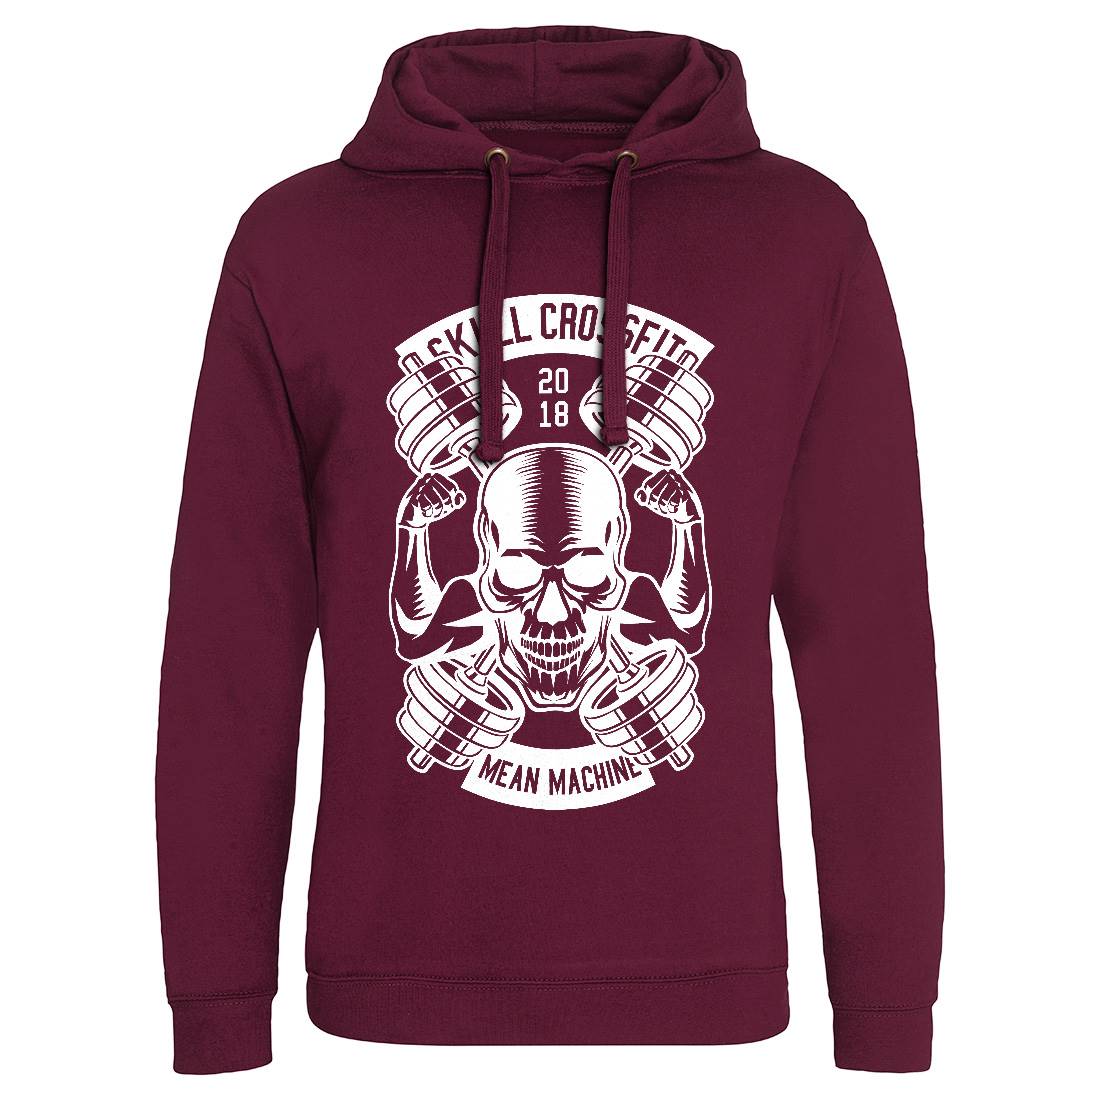 Skull Cross Fit Mens Hoodie Without Pocket Gym B627